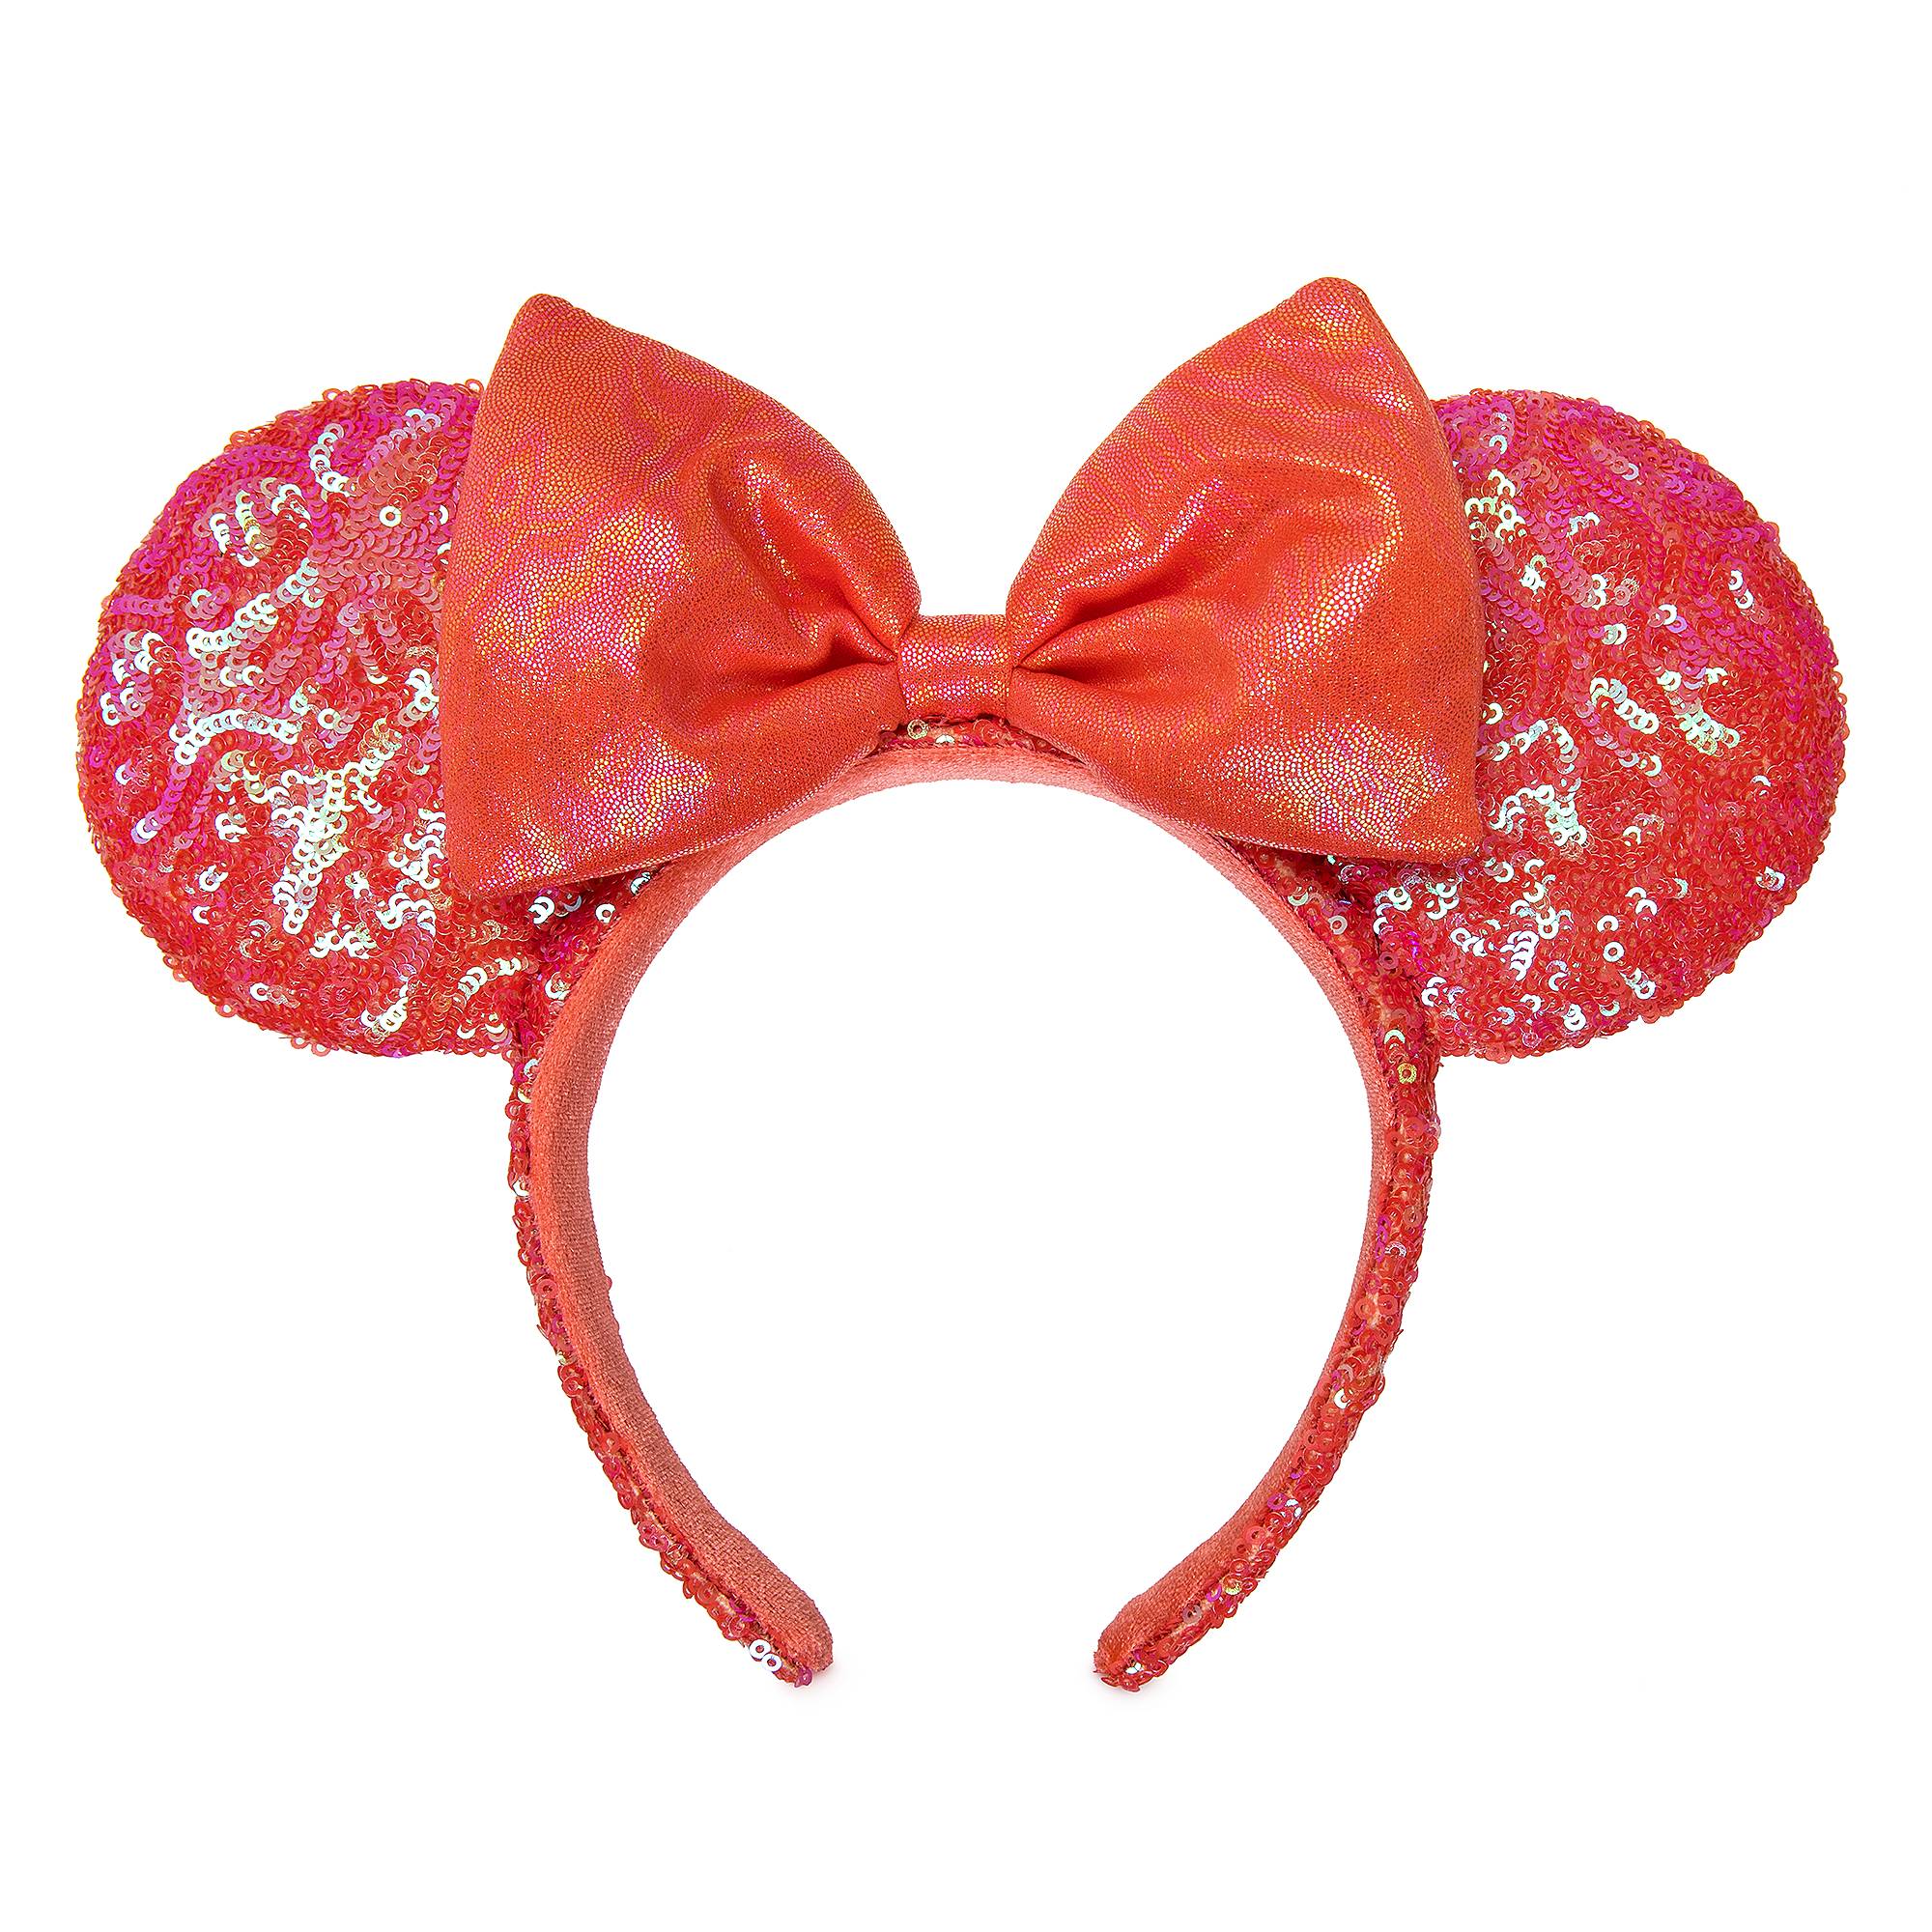 Minnie Mouse Sequined Ear Headband for Adults – Coral image